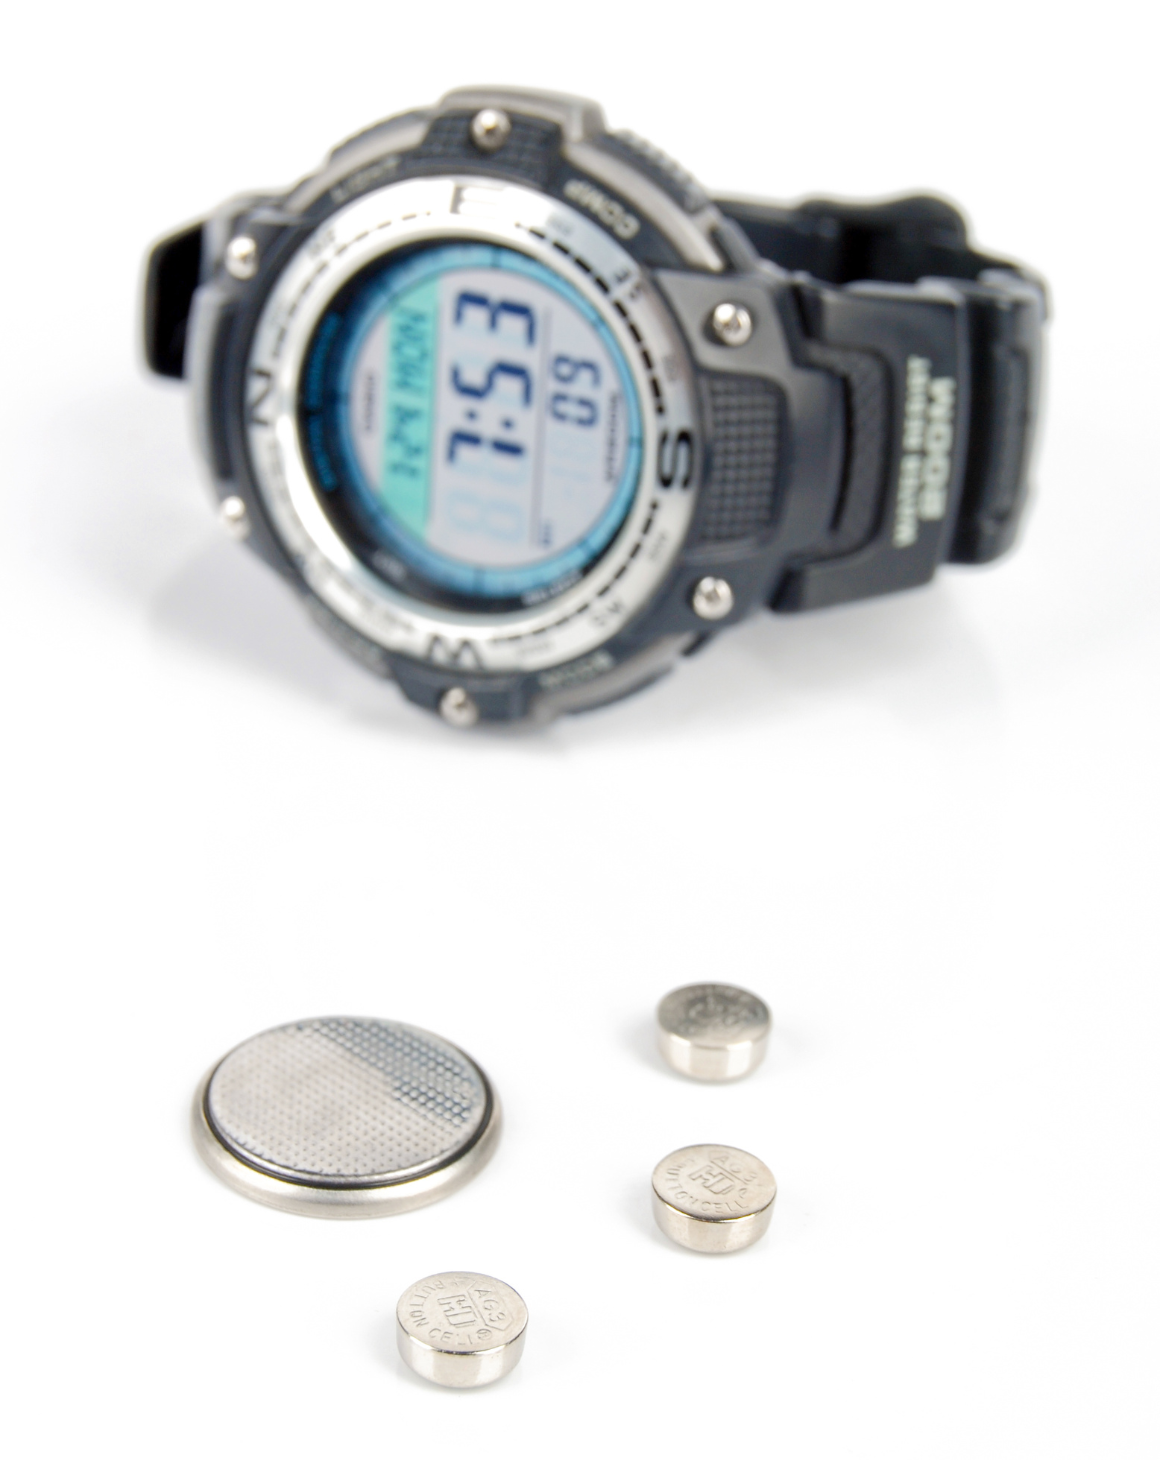 wrist watch and coin and button batteries against a white background